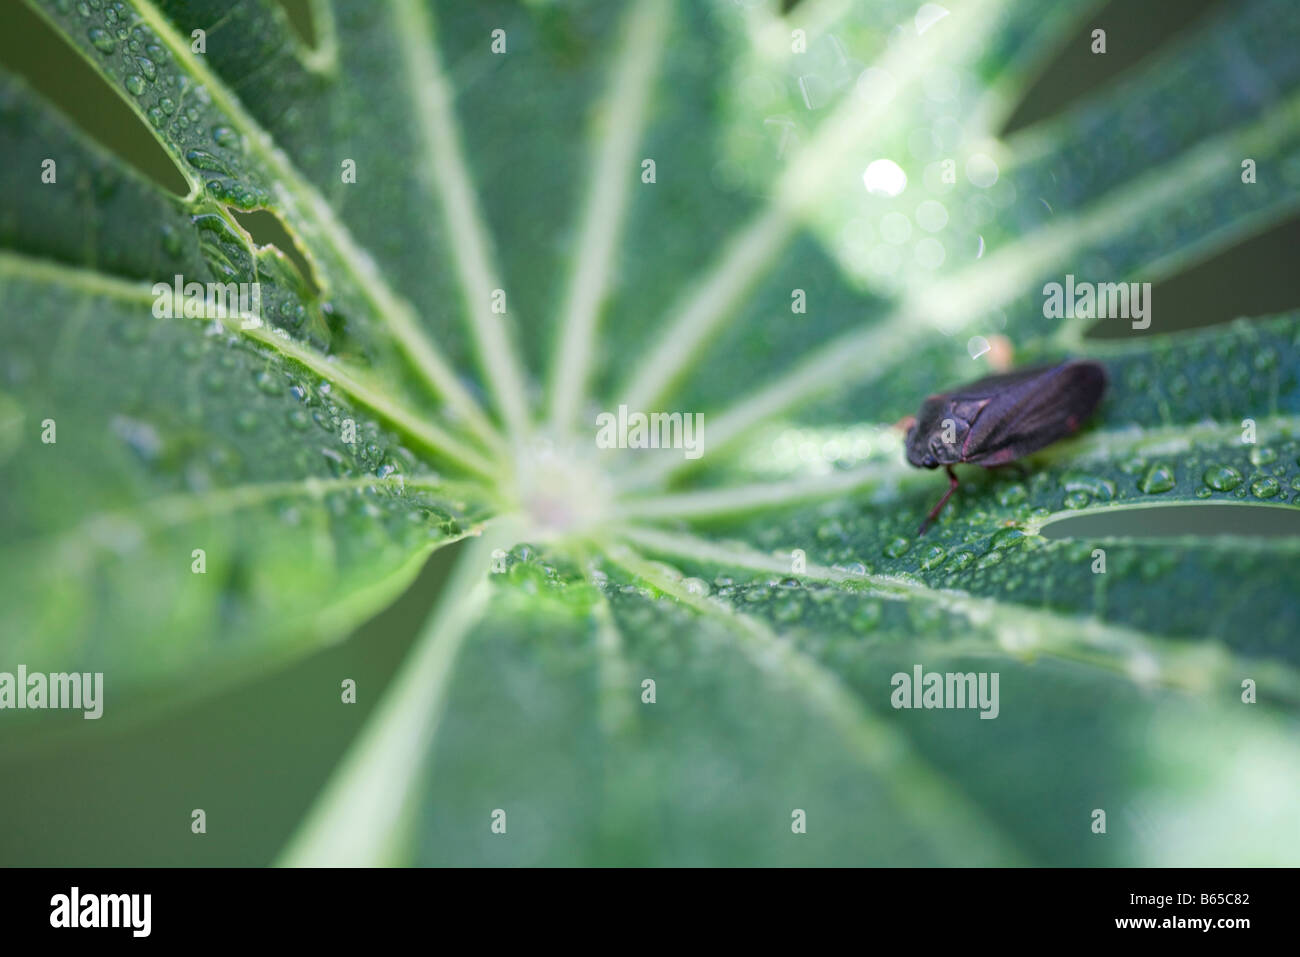 Small insect crawling across dew drop laced cassava leaf Stock Photo